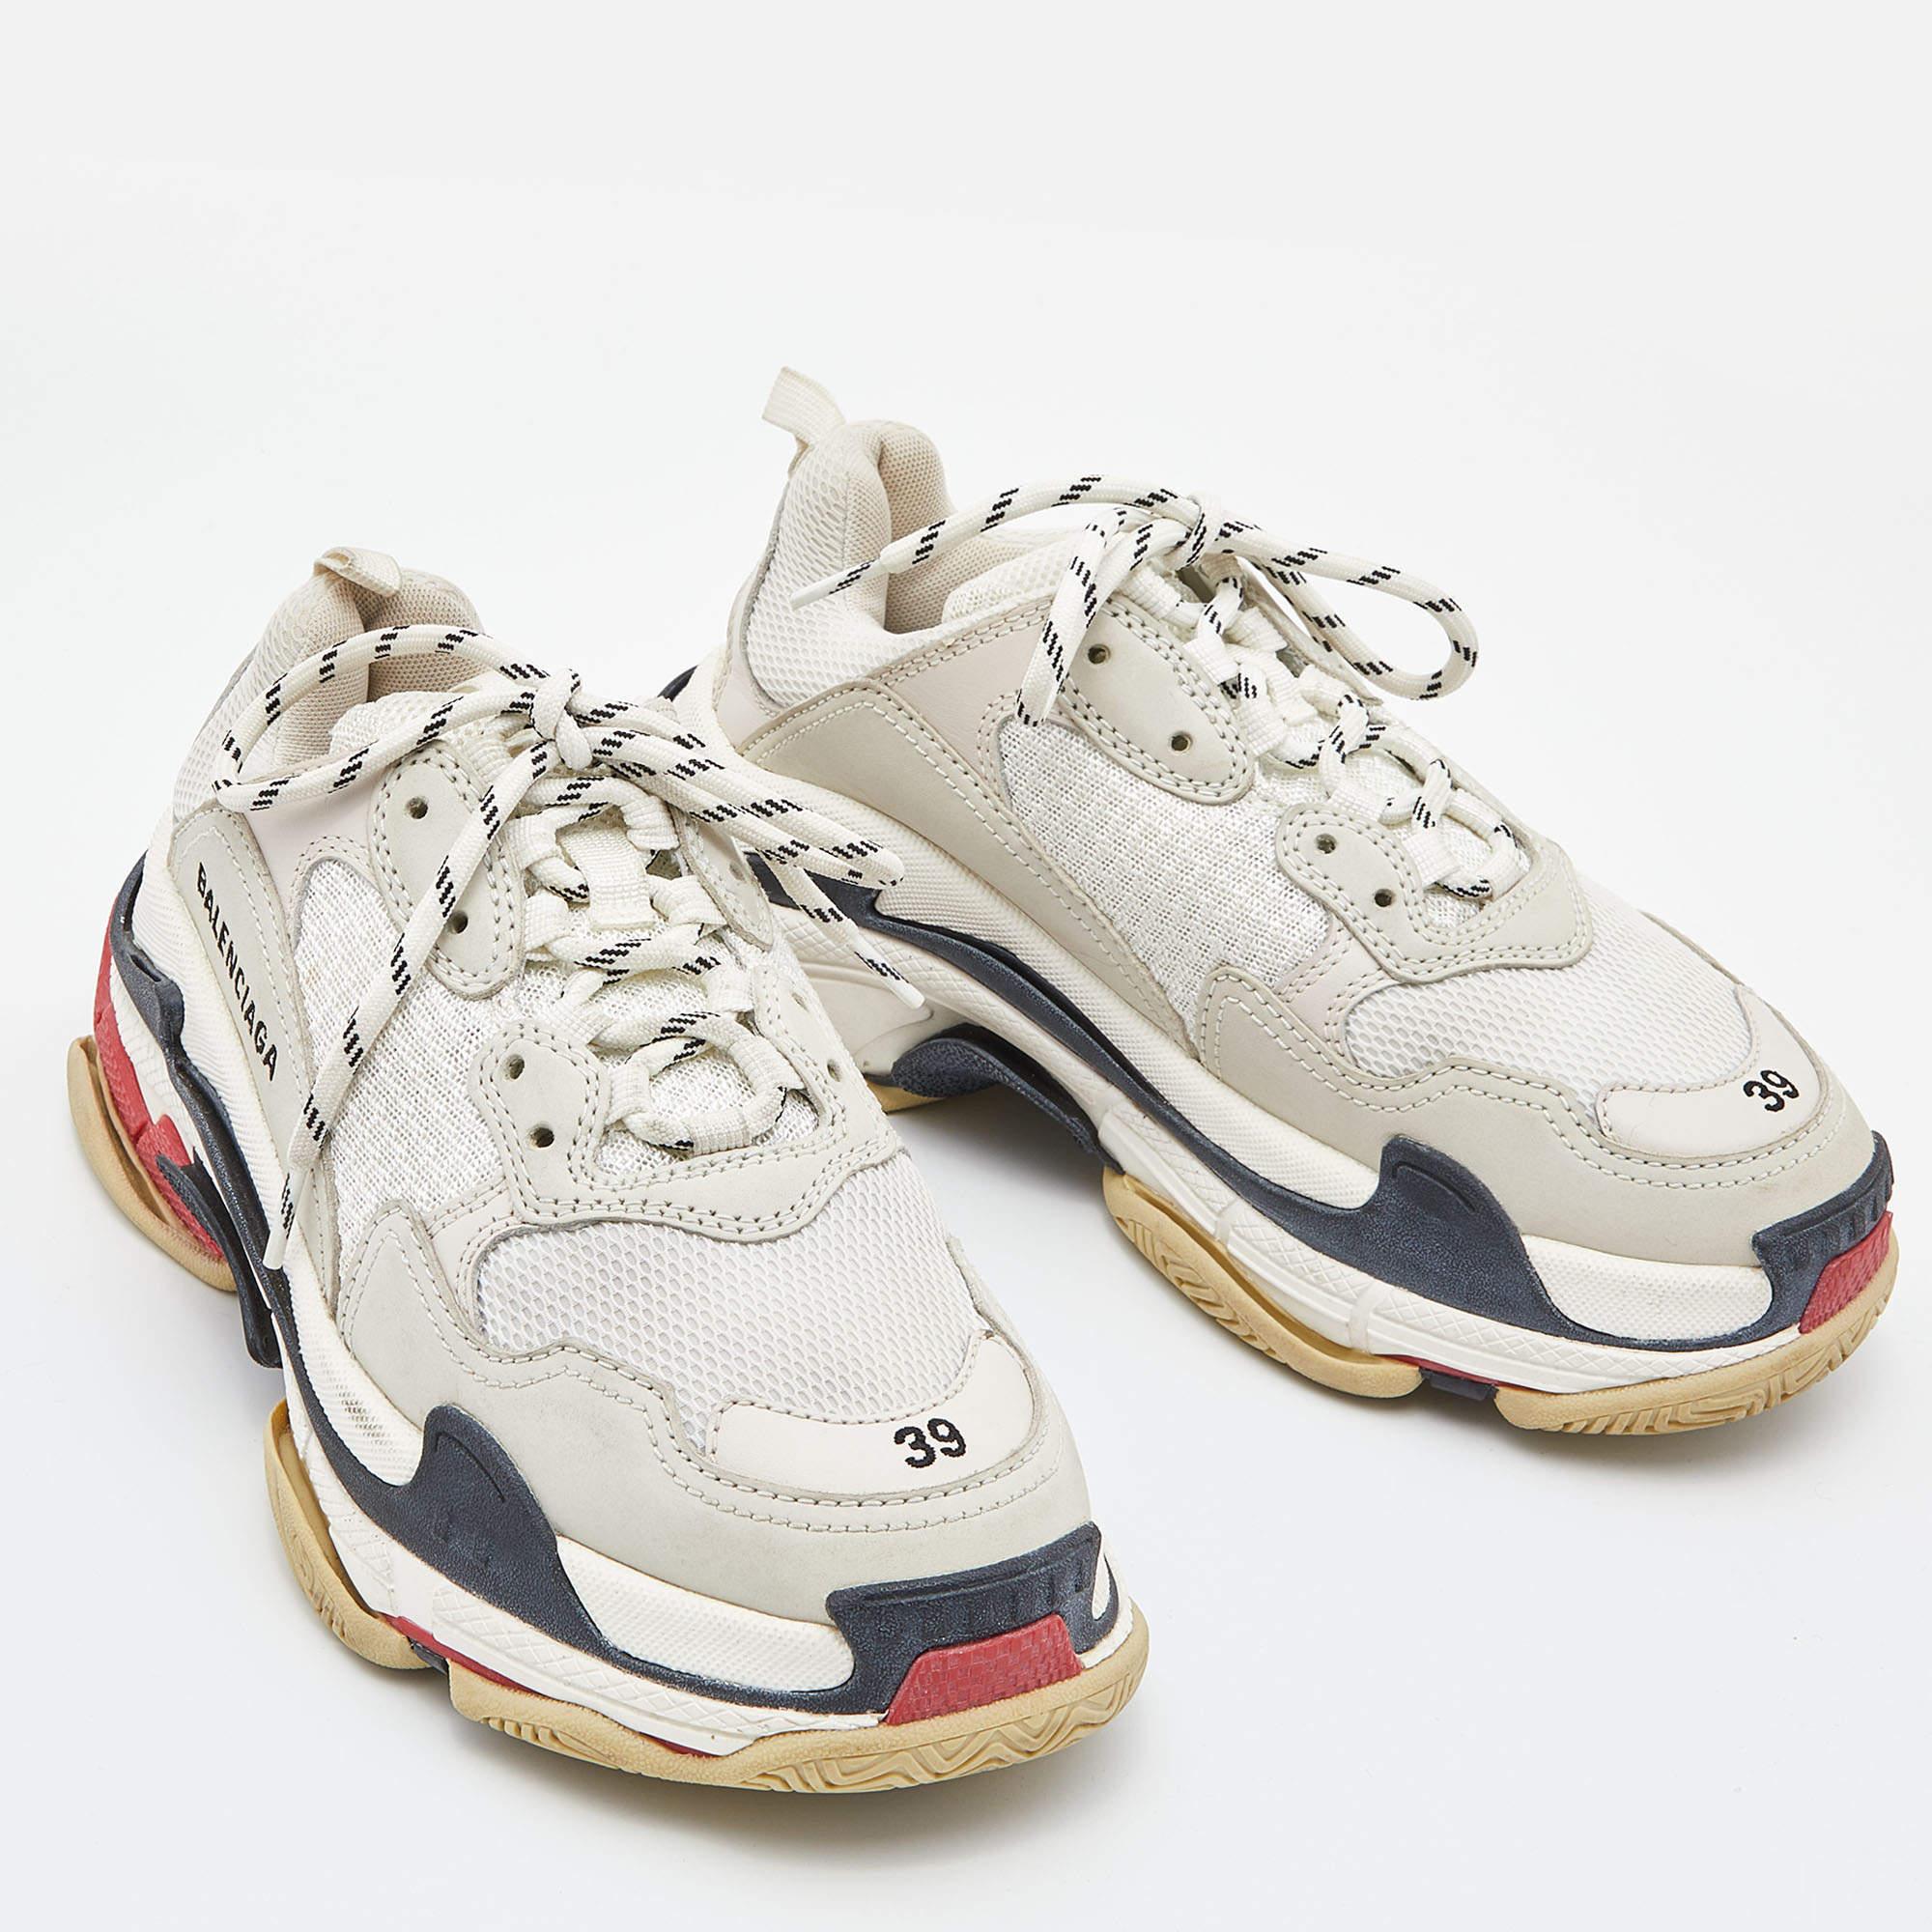 Balenciaga White Leather and Mesh Triple S Sneakers Size 39 1